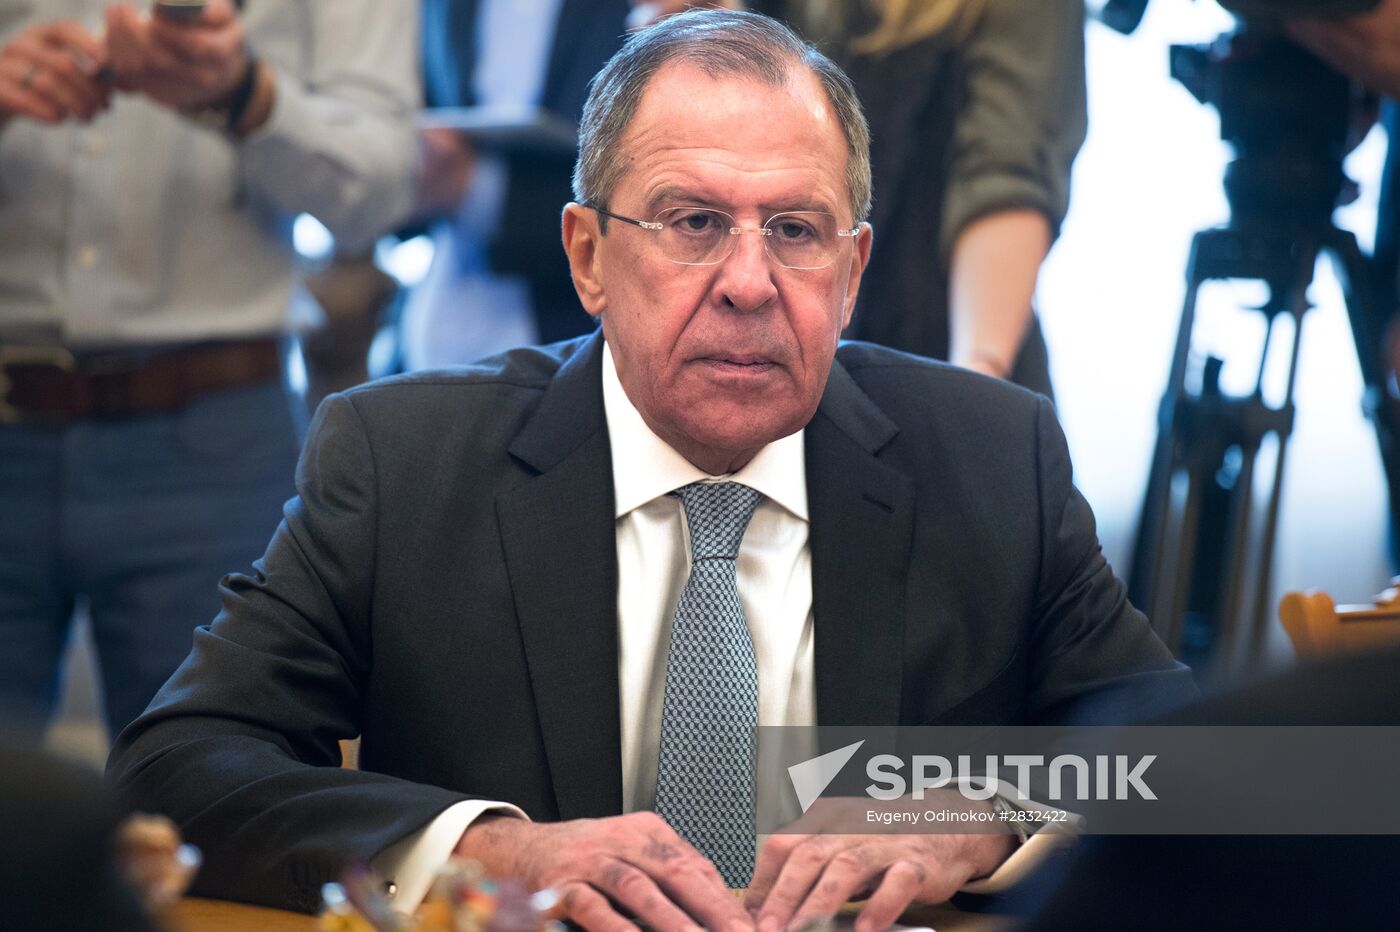 Russian Foreign Minister Sergey Lavrov meets with OPCW Director General Ahmet Üzümcü